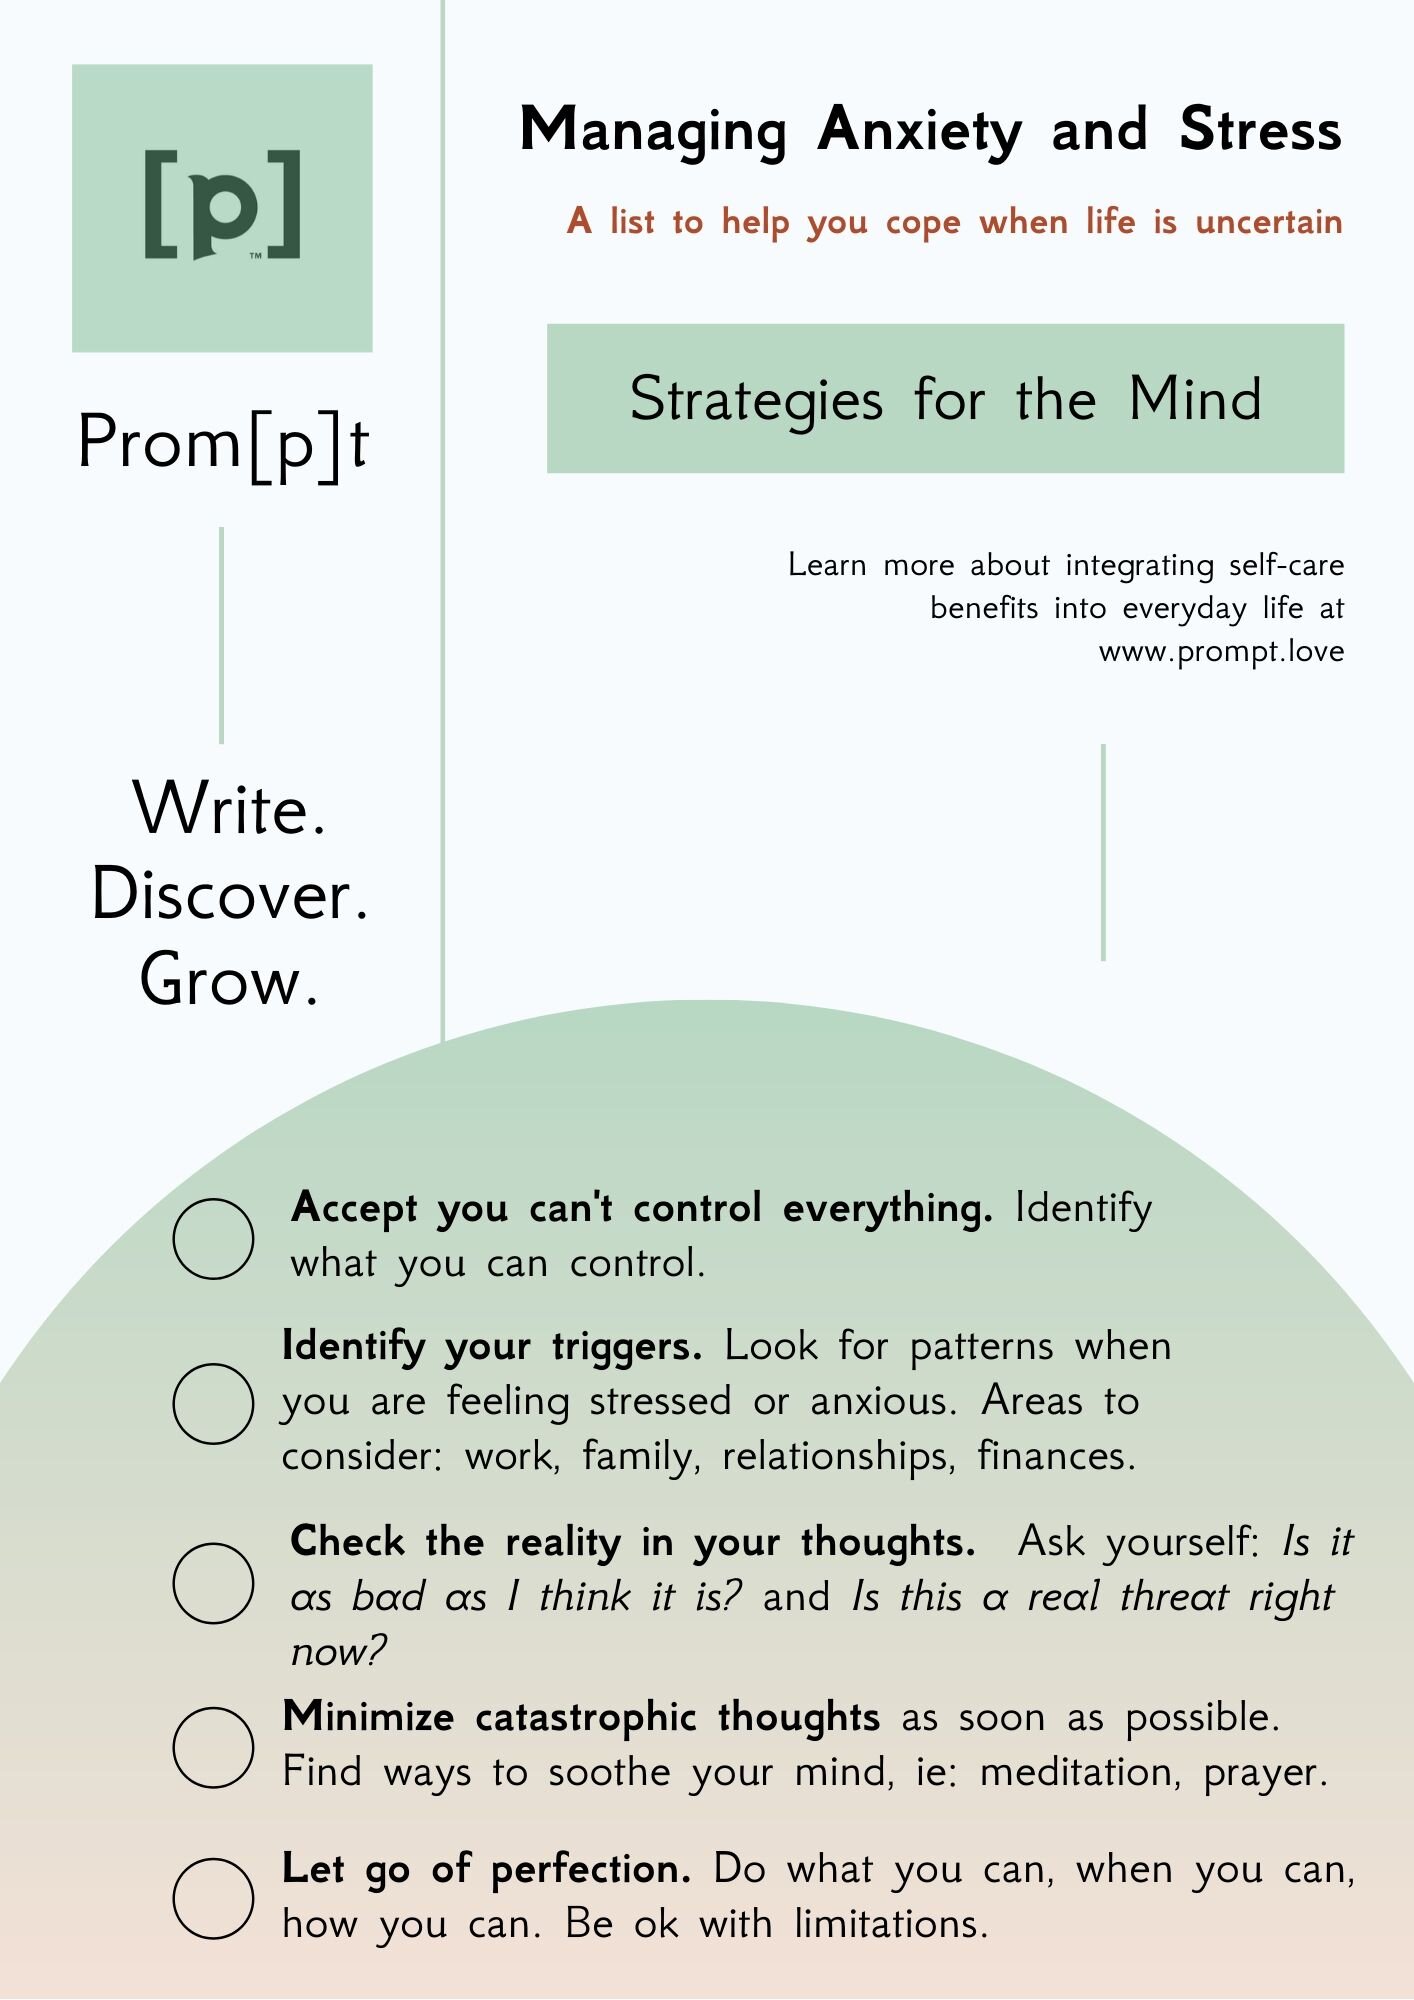 Strategies for In the Mind